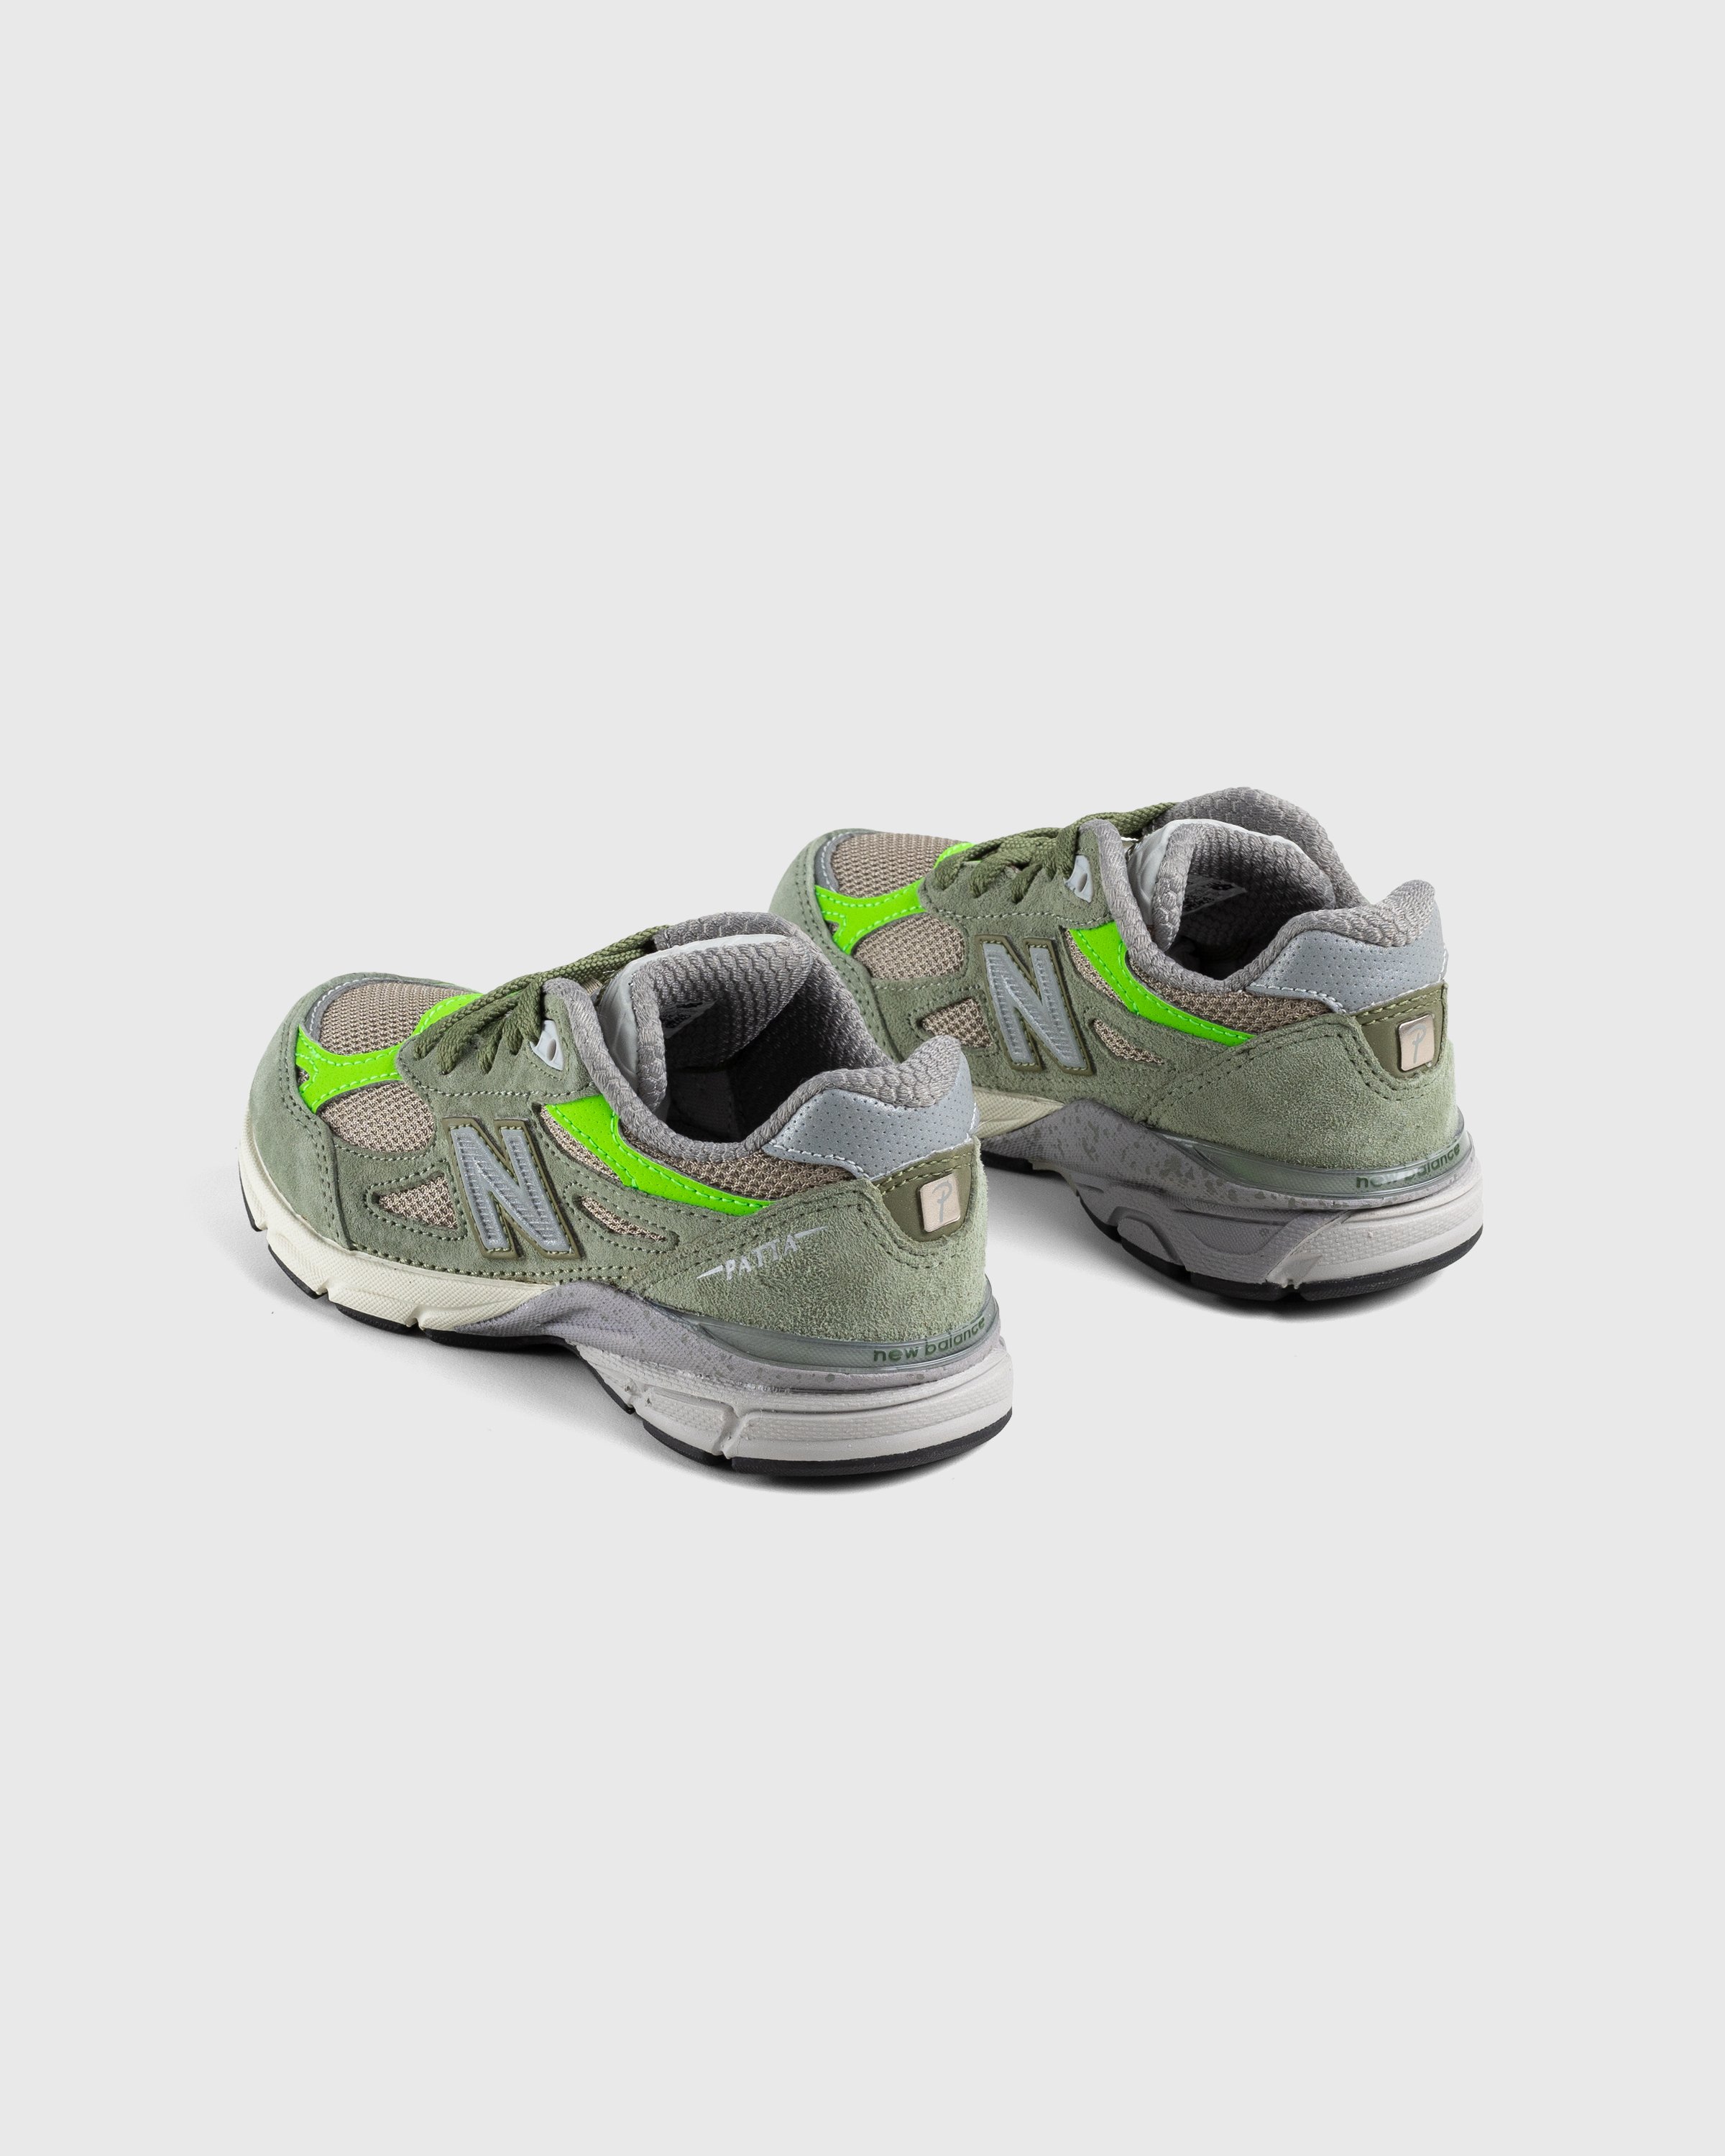 Patta x New Balance - Made in USA 990v3 Olive/White Pepper - Footwear - Green - Image 2